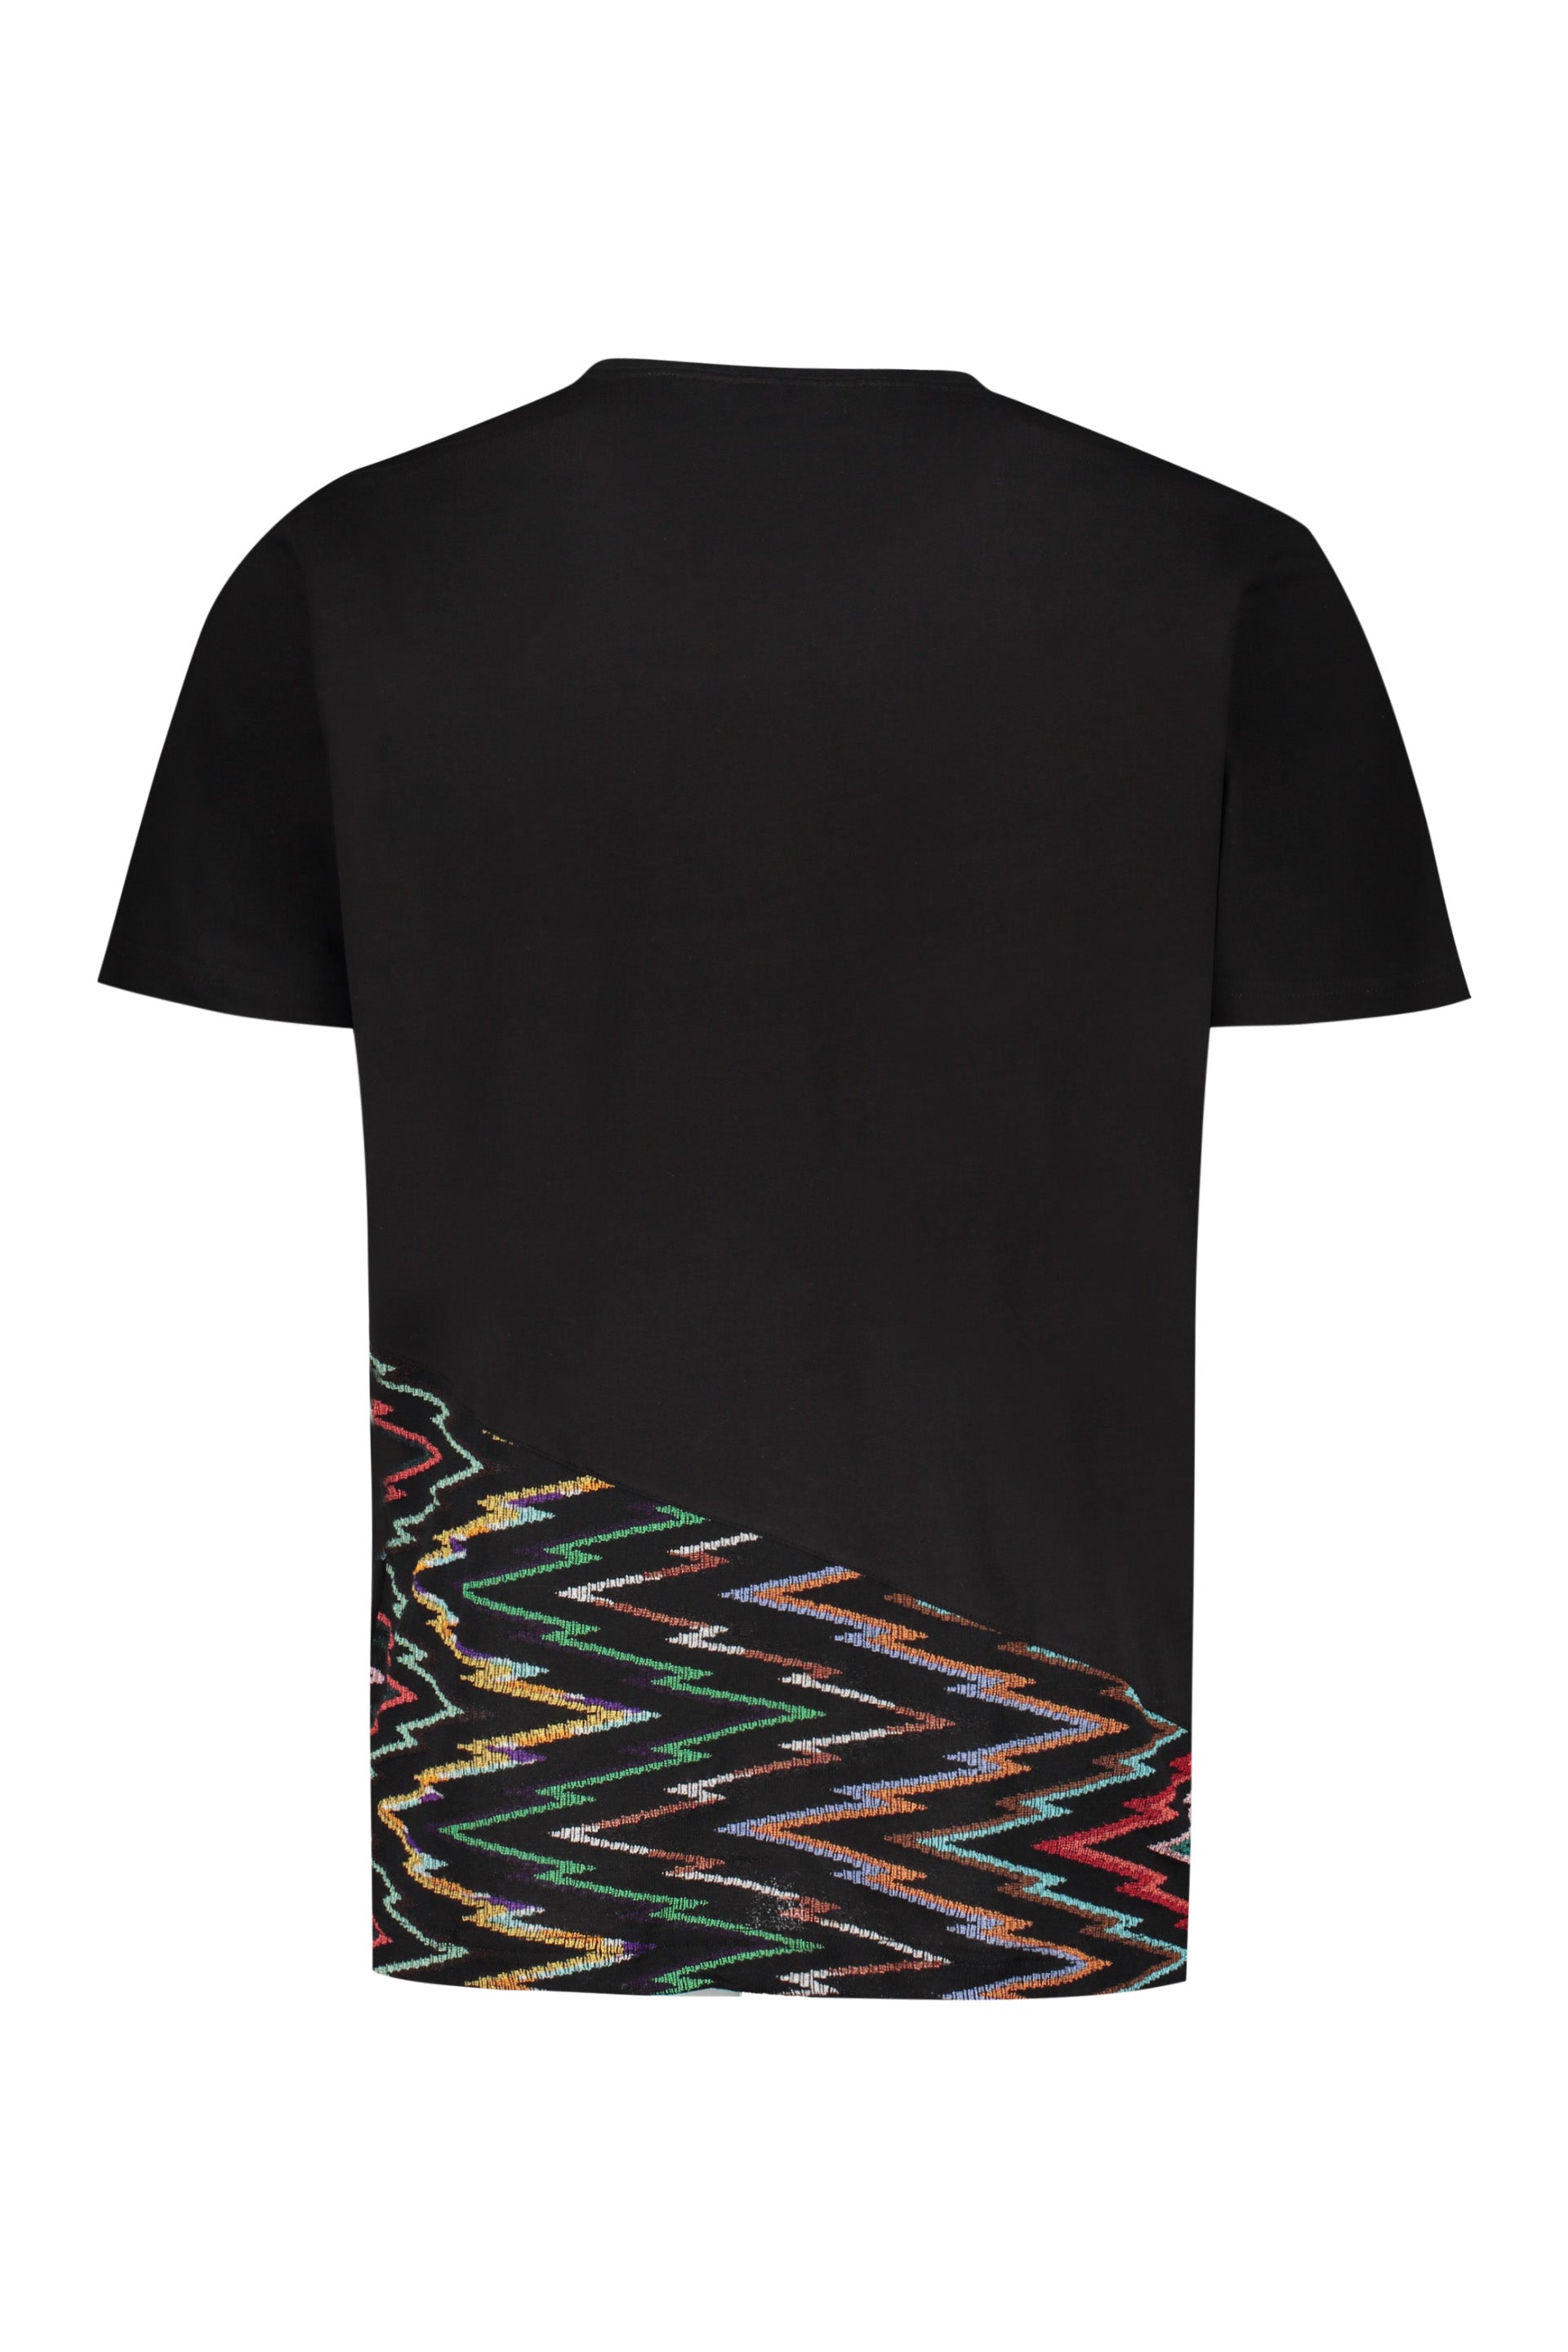 Missoni-OUTLET-SALE-Logo-cotton-t-shirt-Shirts-ARCHIVE-COLLECTION-2_6a76fcaf-3aa1-49a9-8847-98d9f524f59c.jpg